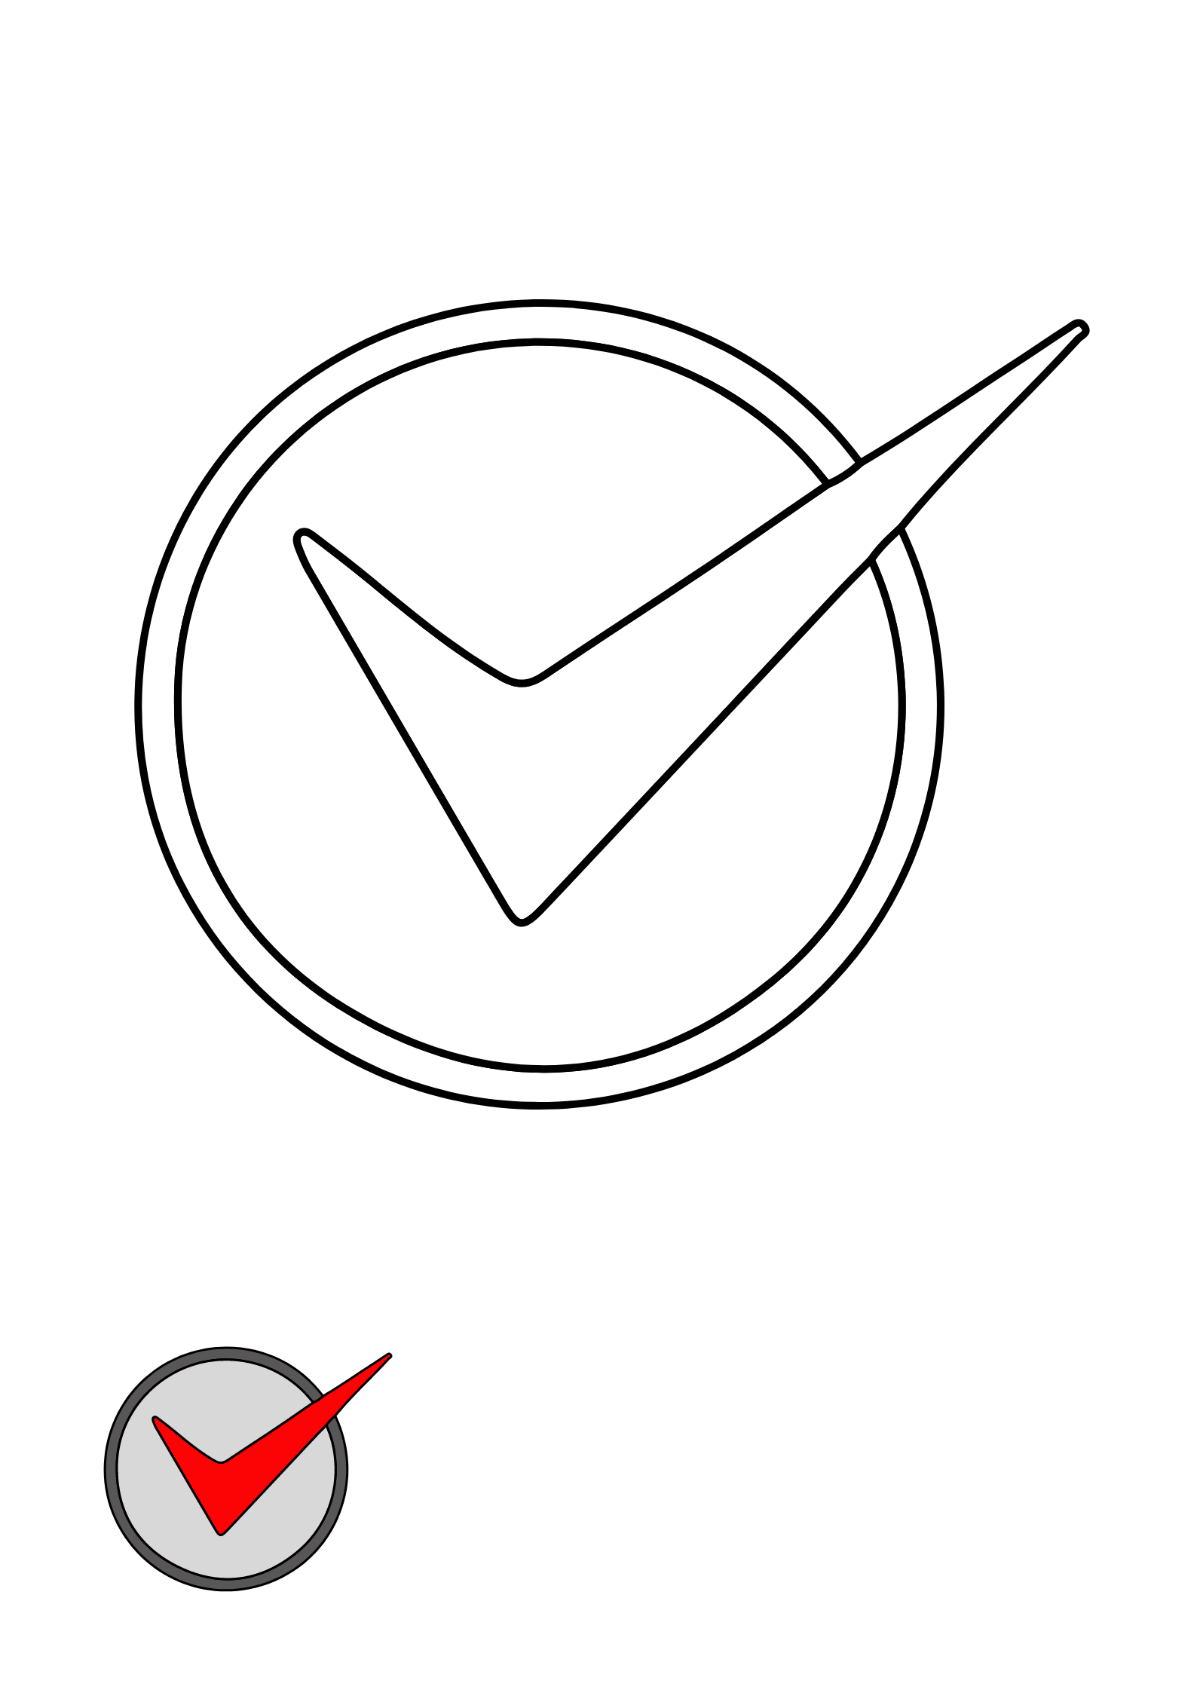 Vote Check Mark coloring page Template